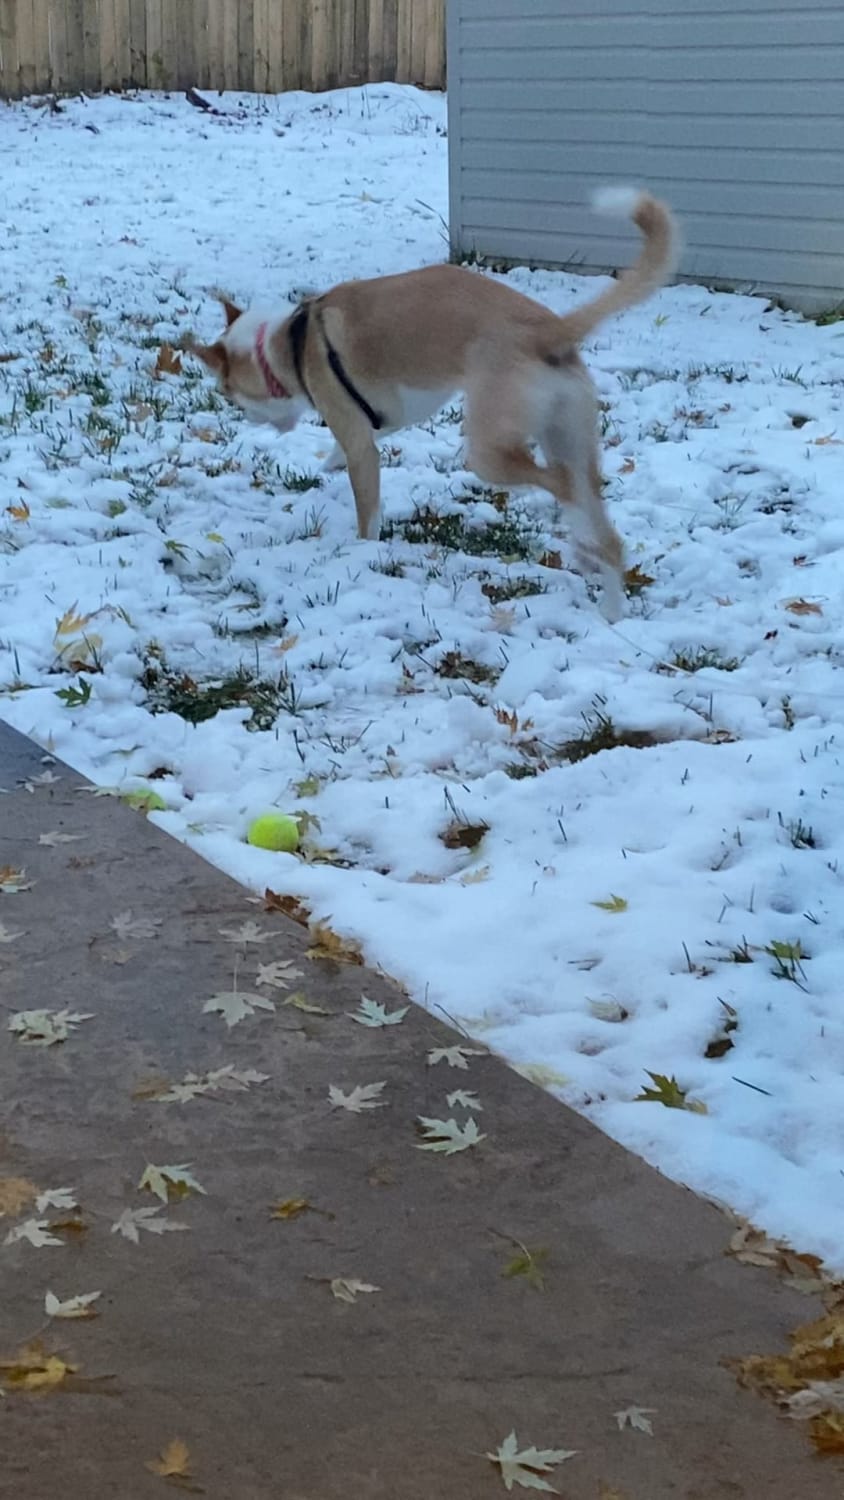 My first dog’s first snow!